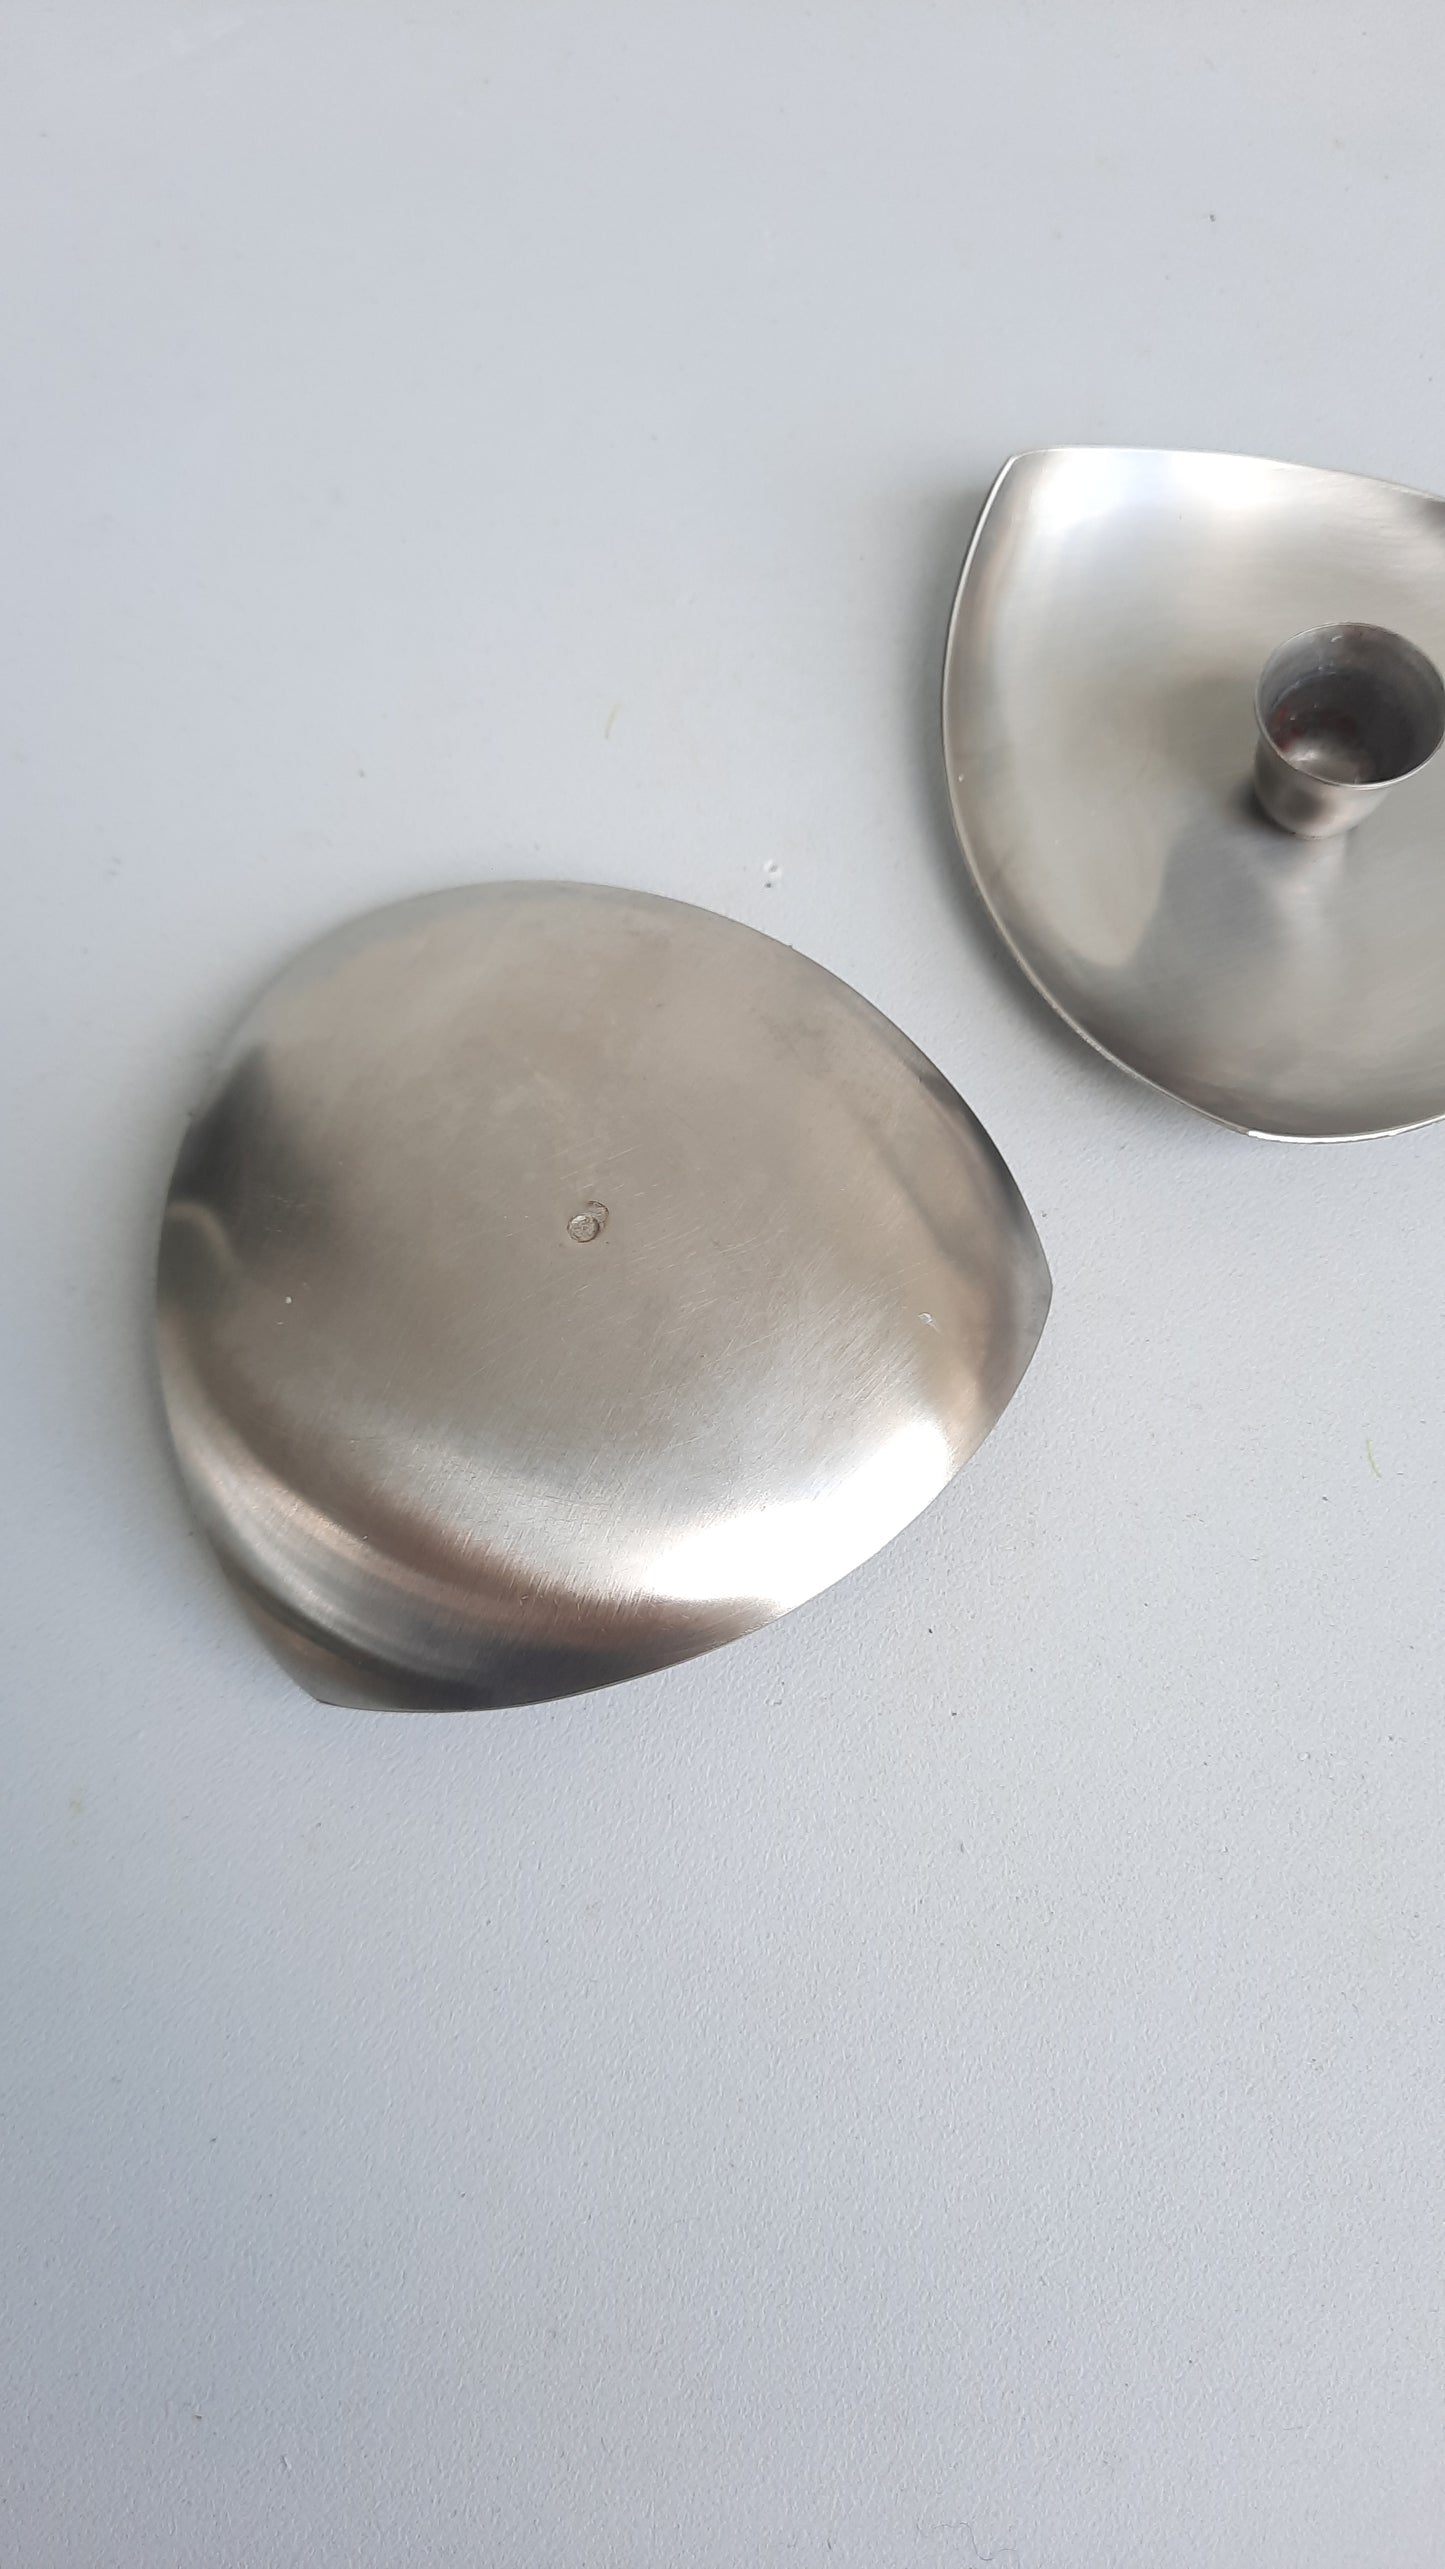 Set of 2 Mid-century Stainless Steel Candleholders